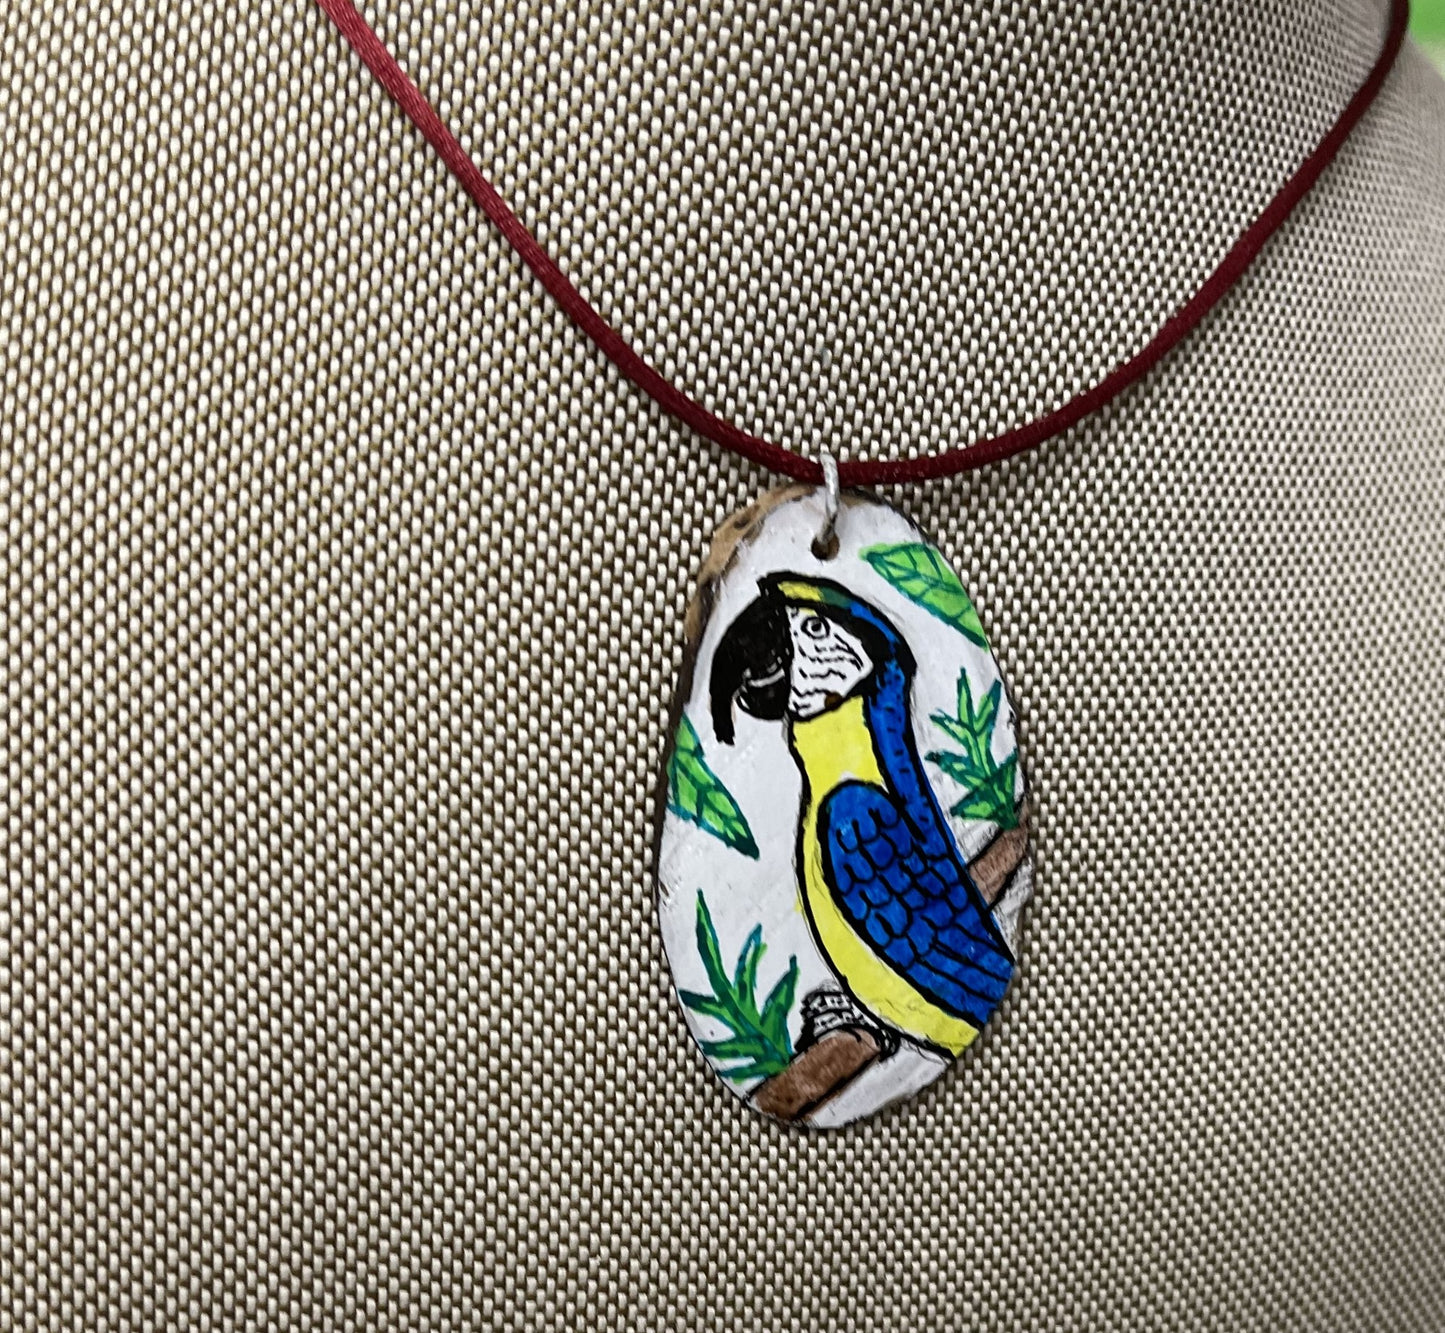 Etched Tagua Slice Yellowhead Parrot Carved Necklace Pendant Panama